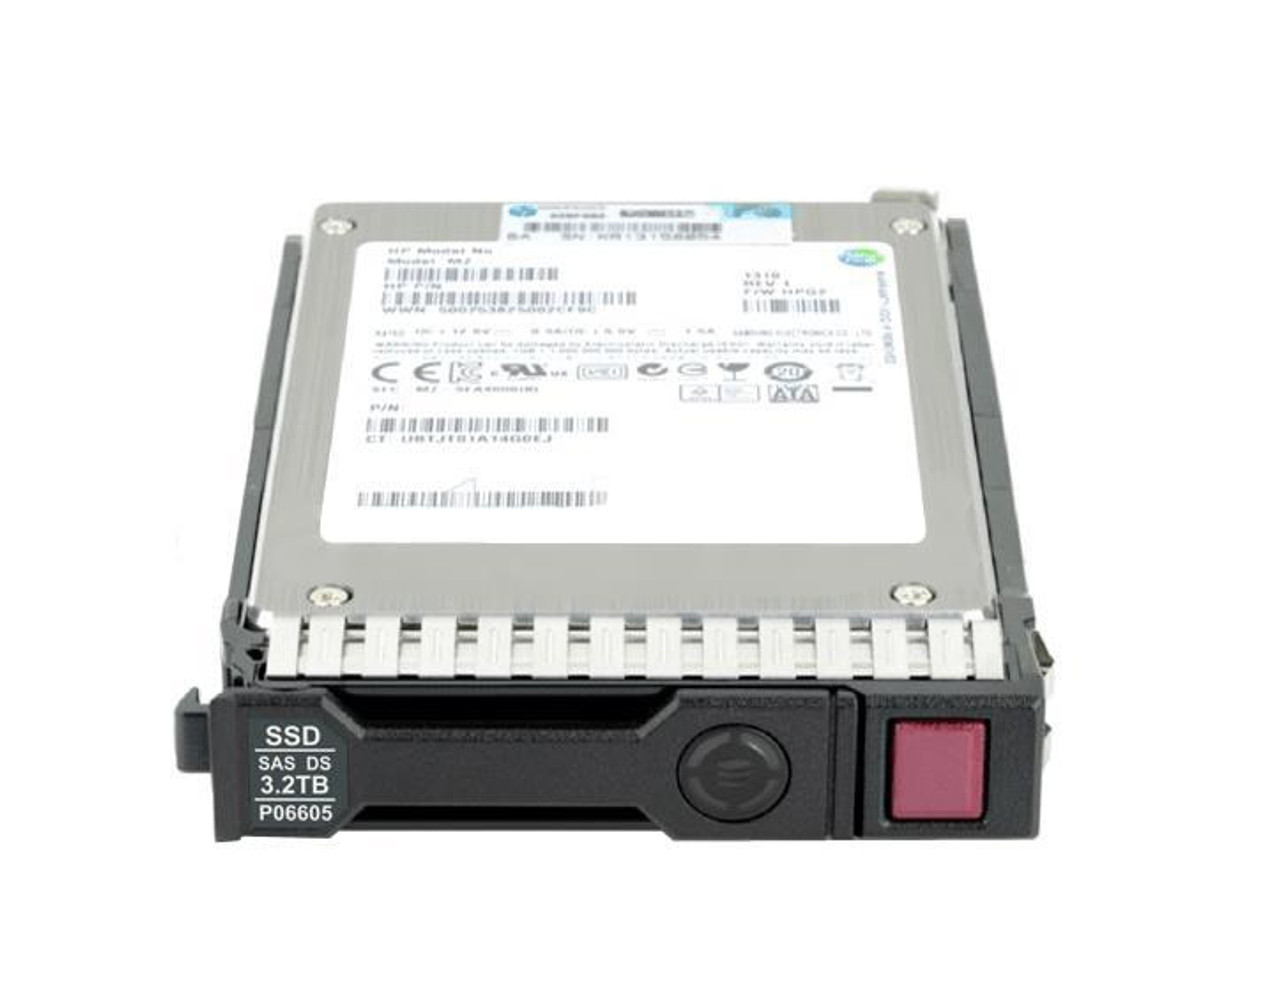 P04547-B21#0D1 HPE 3.2TB SAS 12Gbps Write Intensive 2.5-inch Internal Solid State Drive (SSD) with Smart Carrier